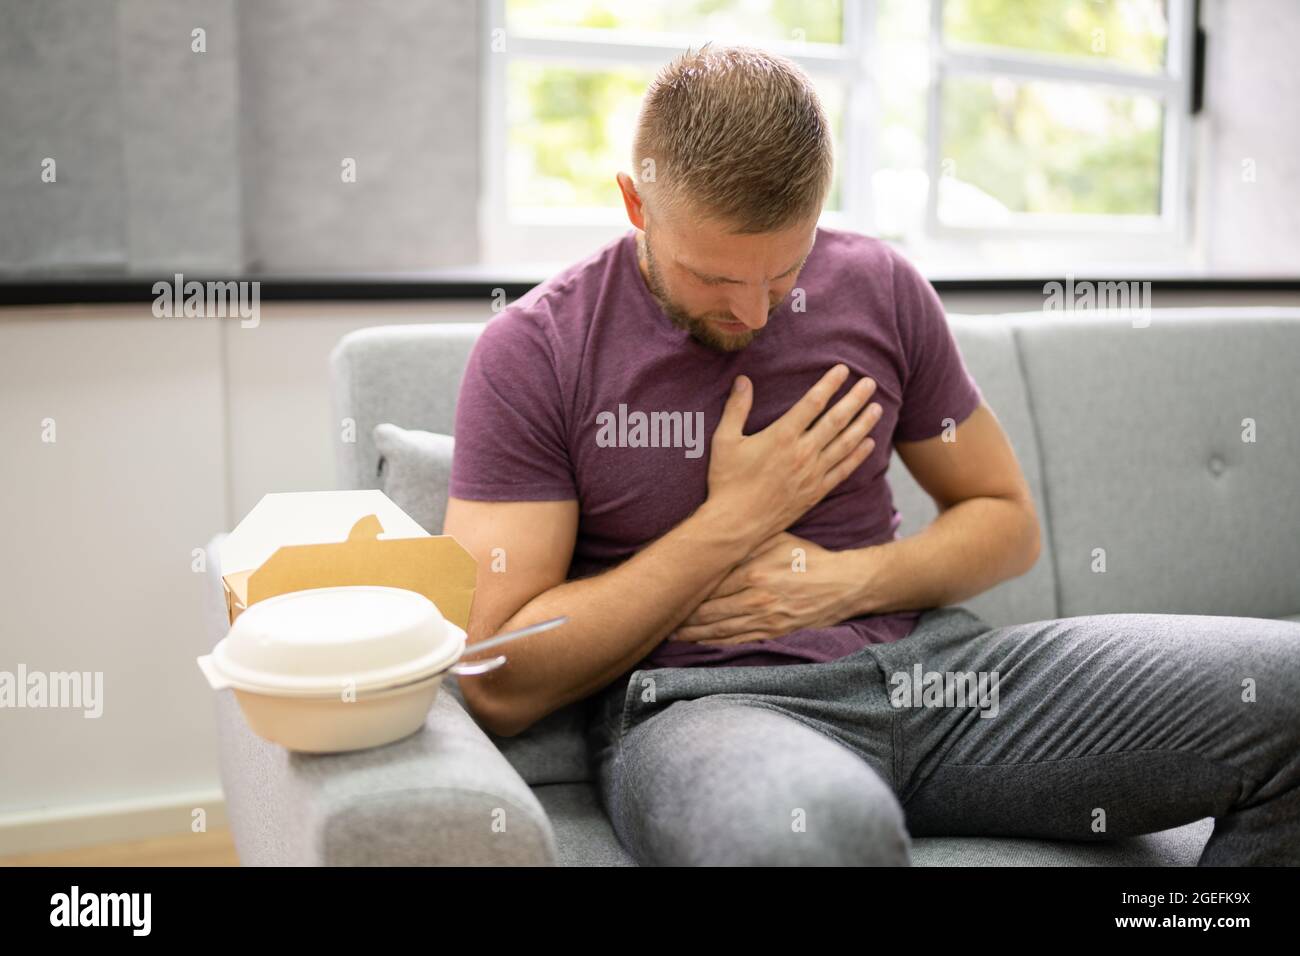 Unhealthy Fastfood Stomach Heartburn. Person After Eating Food Stock Photo